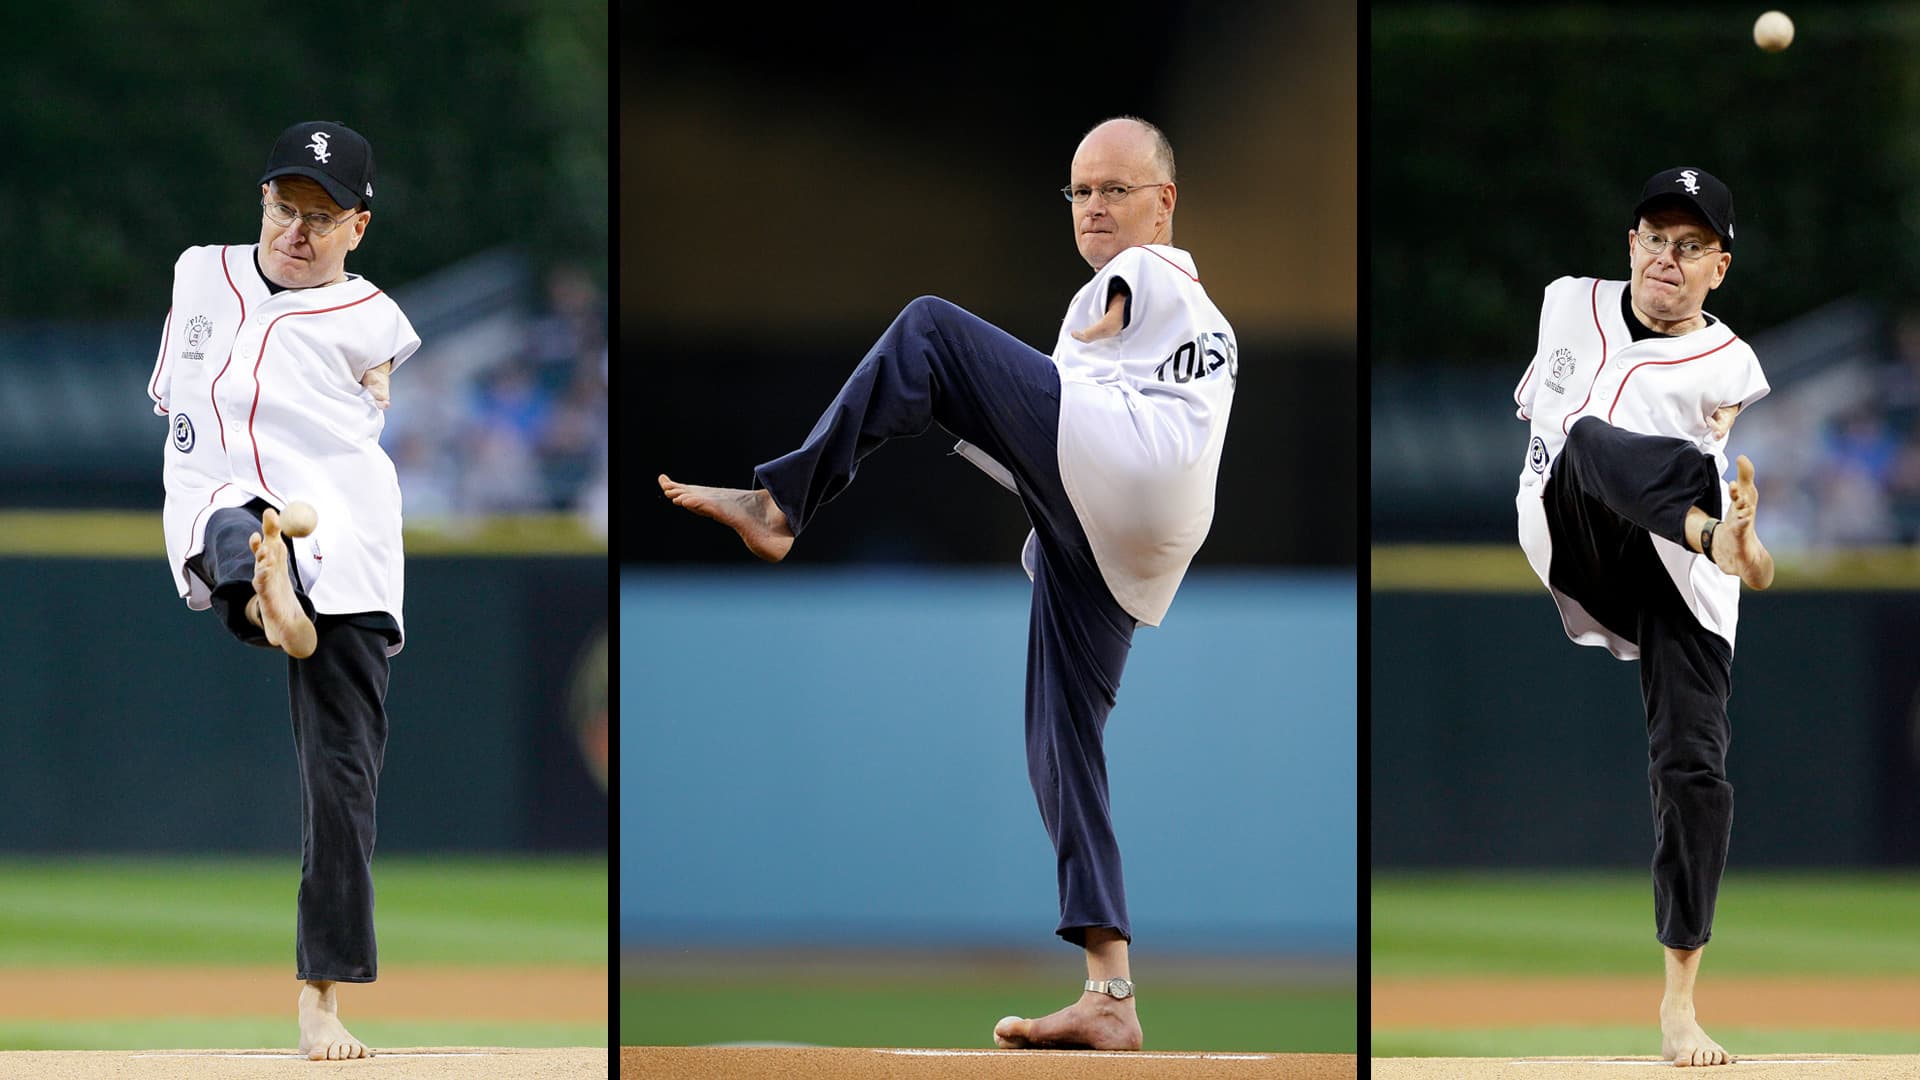 Collage of three images of Tom Willis throwing out the first pitch